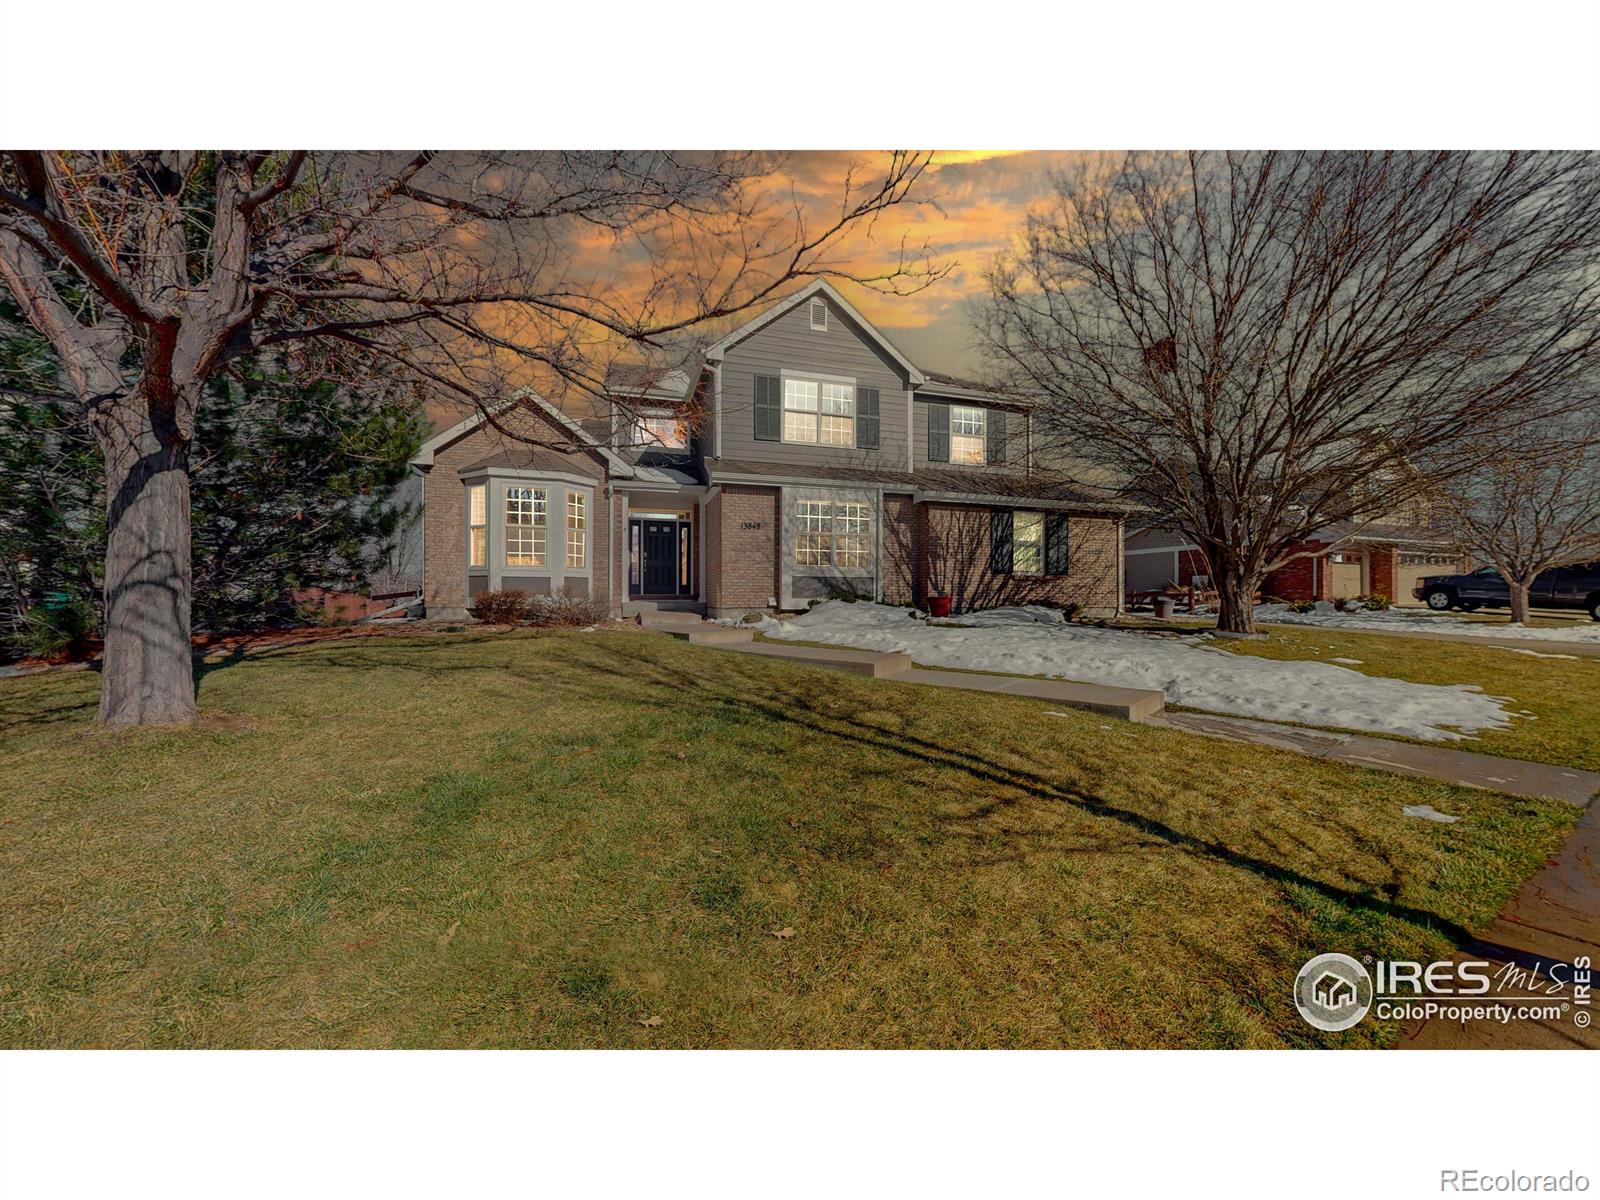 Report Image for 13848  Teal Creek Drive,Broomfield, Colorado